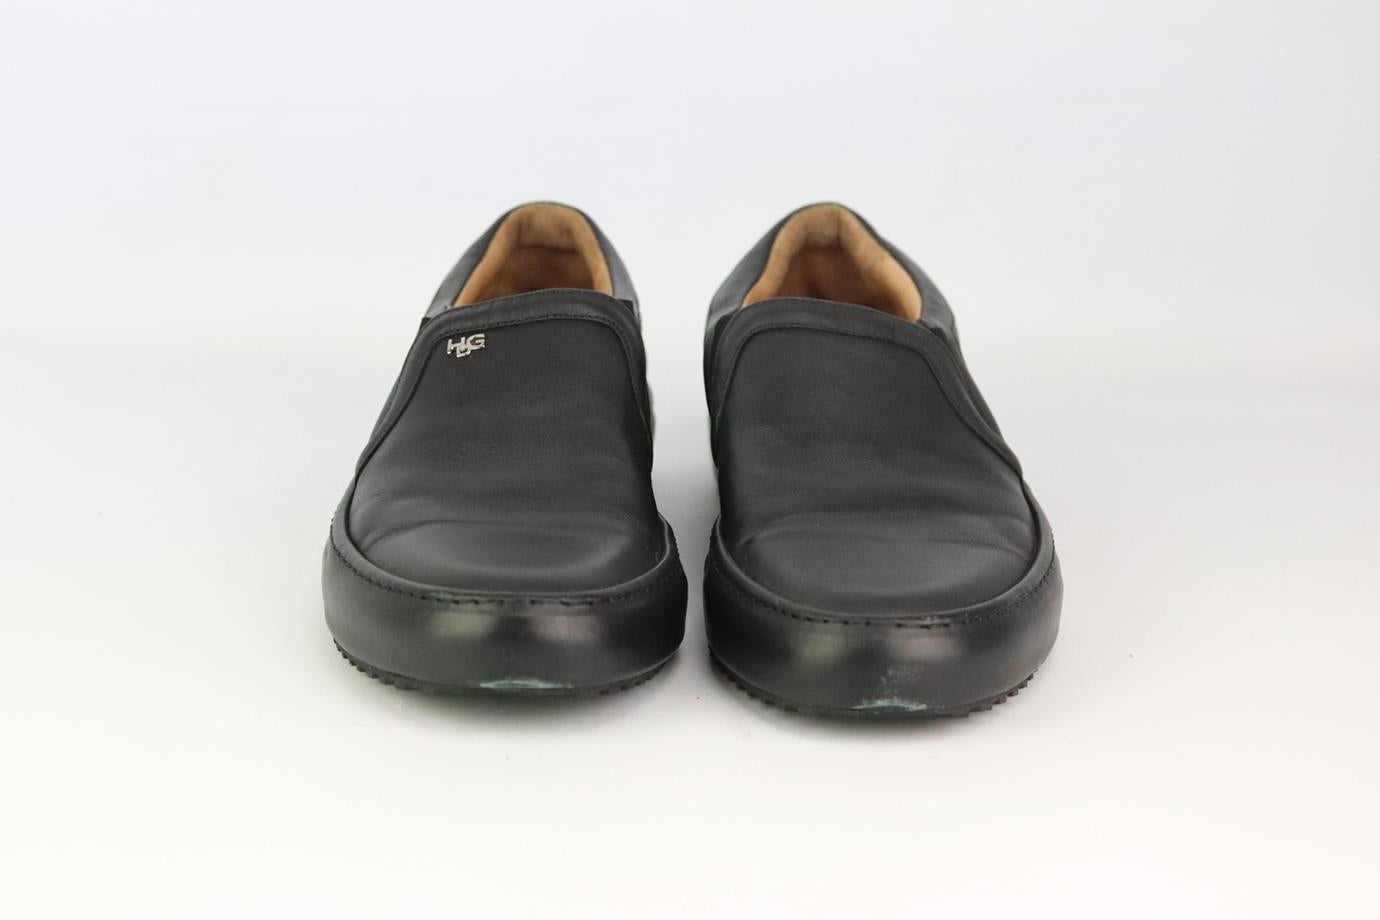 Givenchy leather slip on sneakers. Made from black leather in a classic slip-on sneaker style with the brand’s silver-tone logo on the side. Black. Slip on. Does not come with box or dustbag. Size: EU 43 (UK 9, US 10). Insole: 11.1 in. Heel: 1.25 in